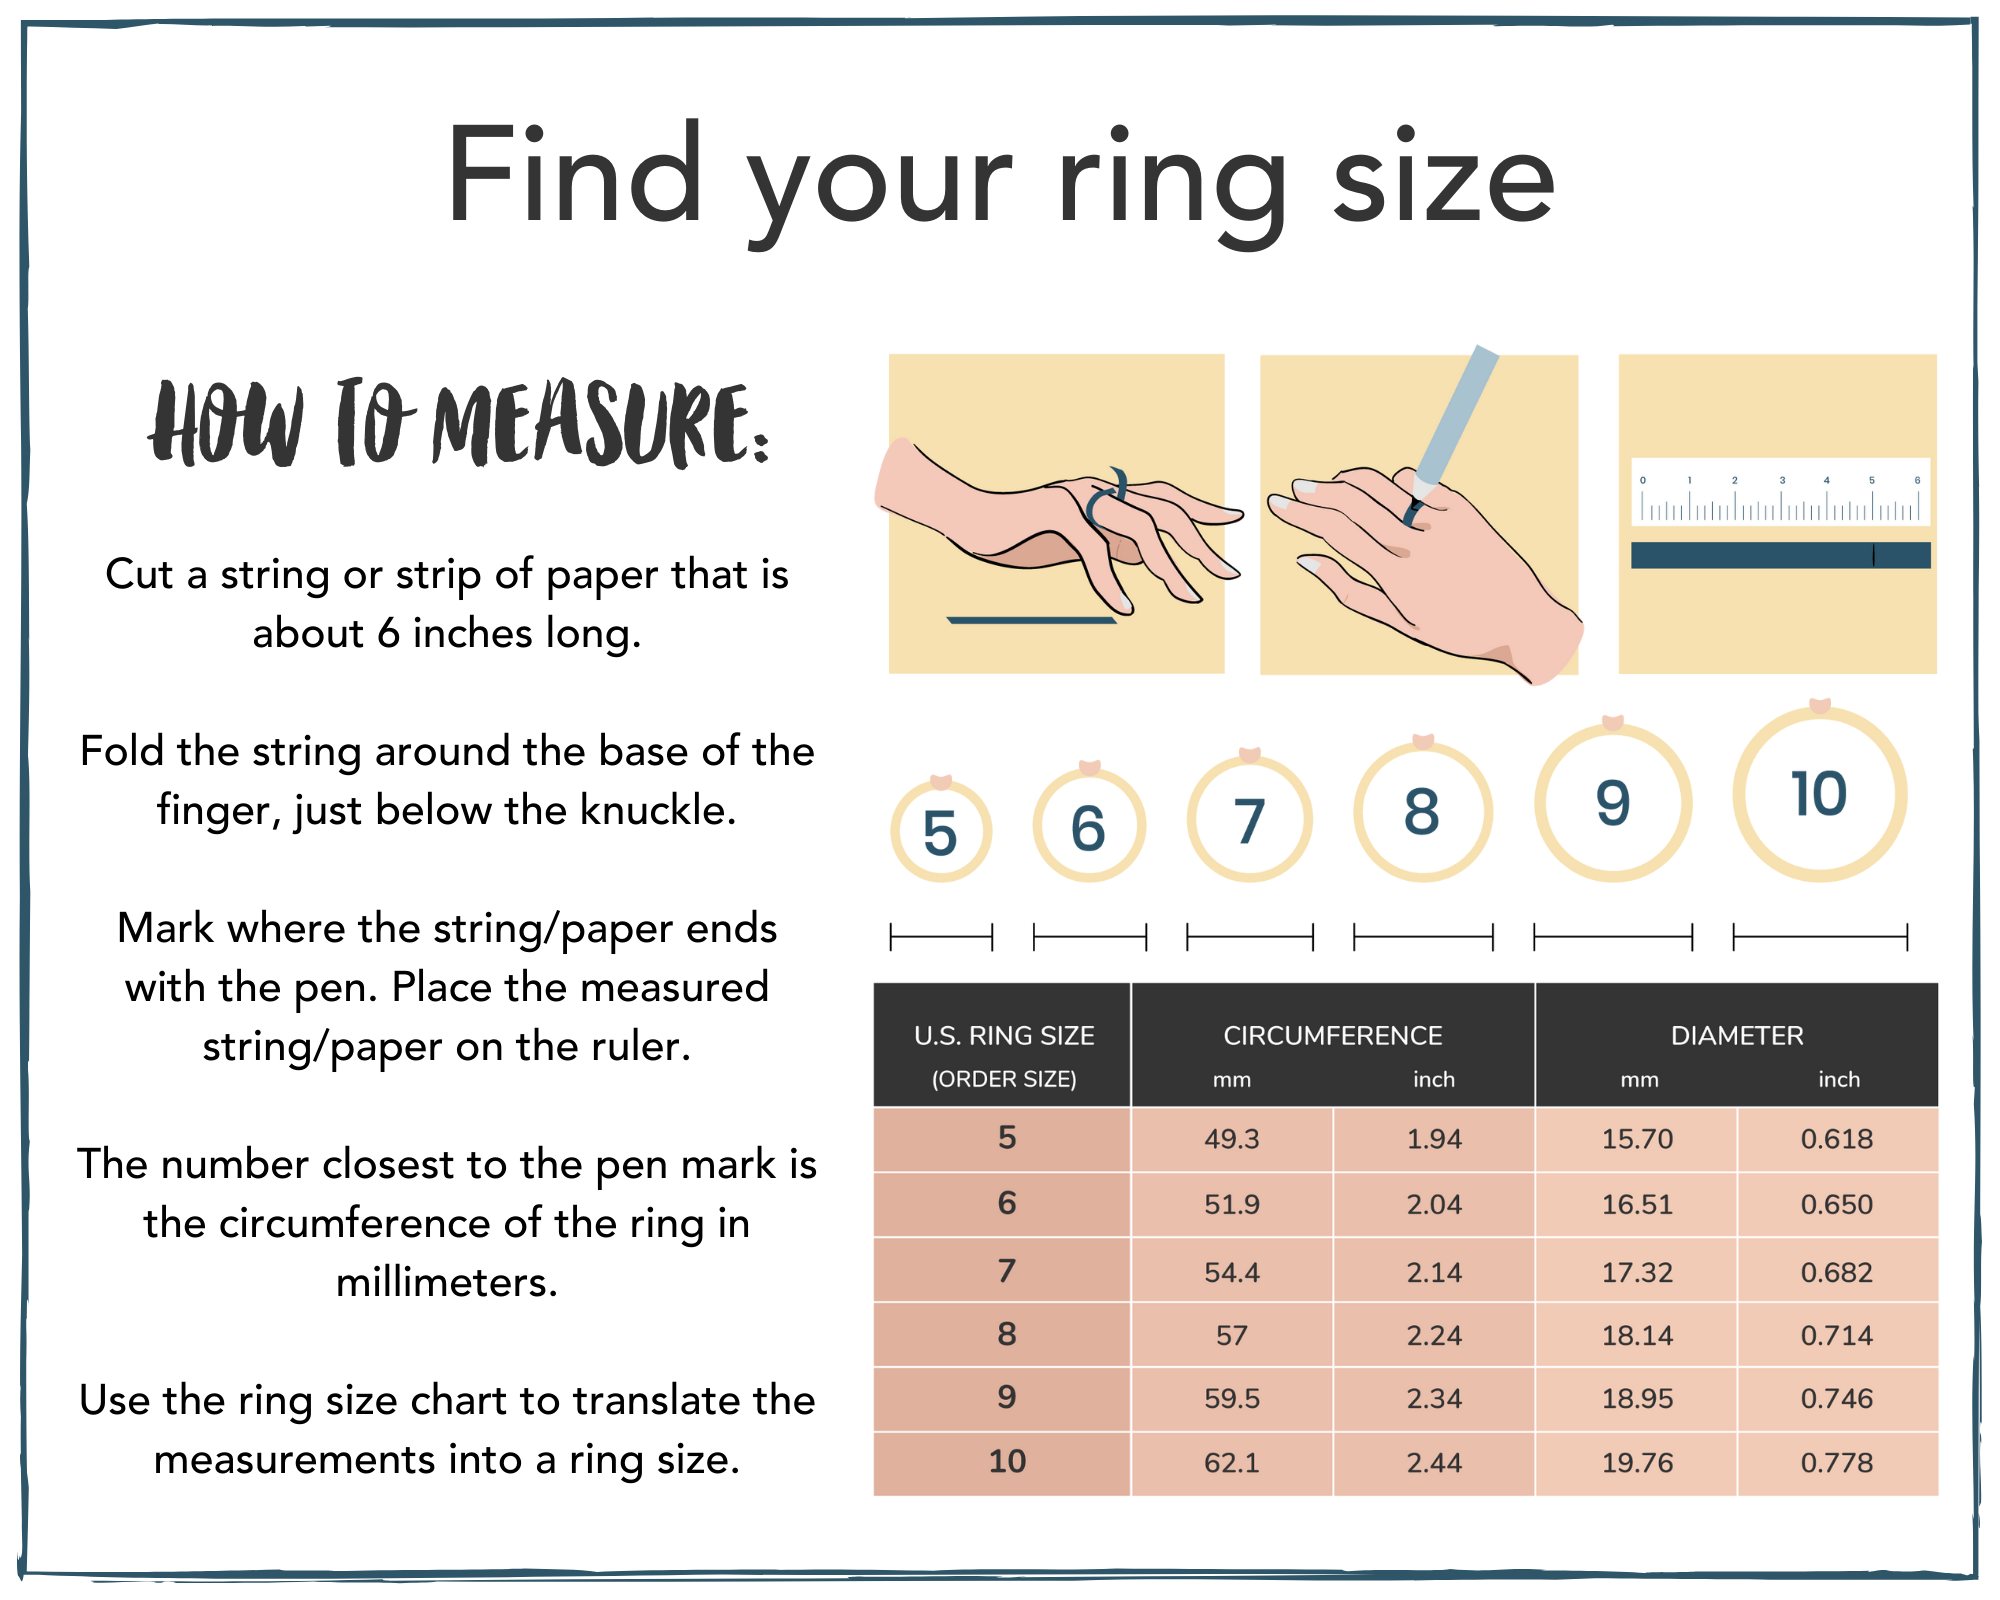 How to Measure Your Ring Size 